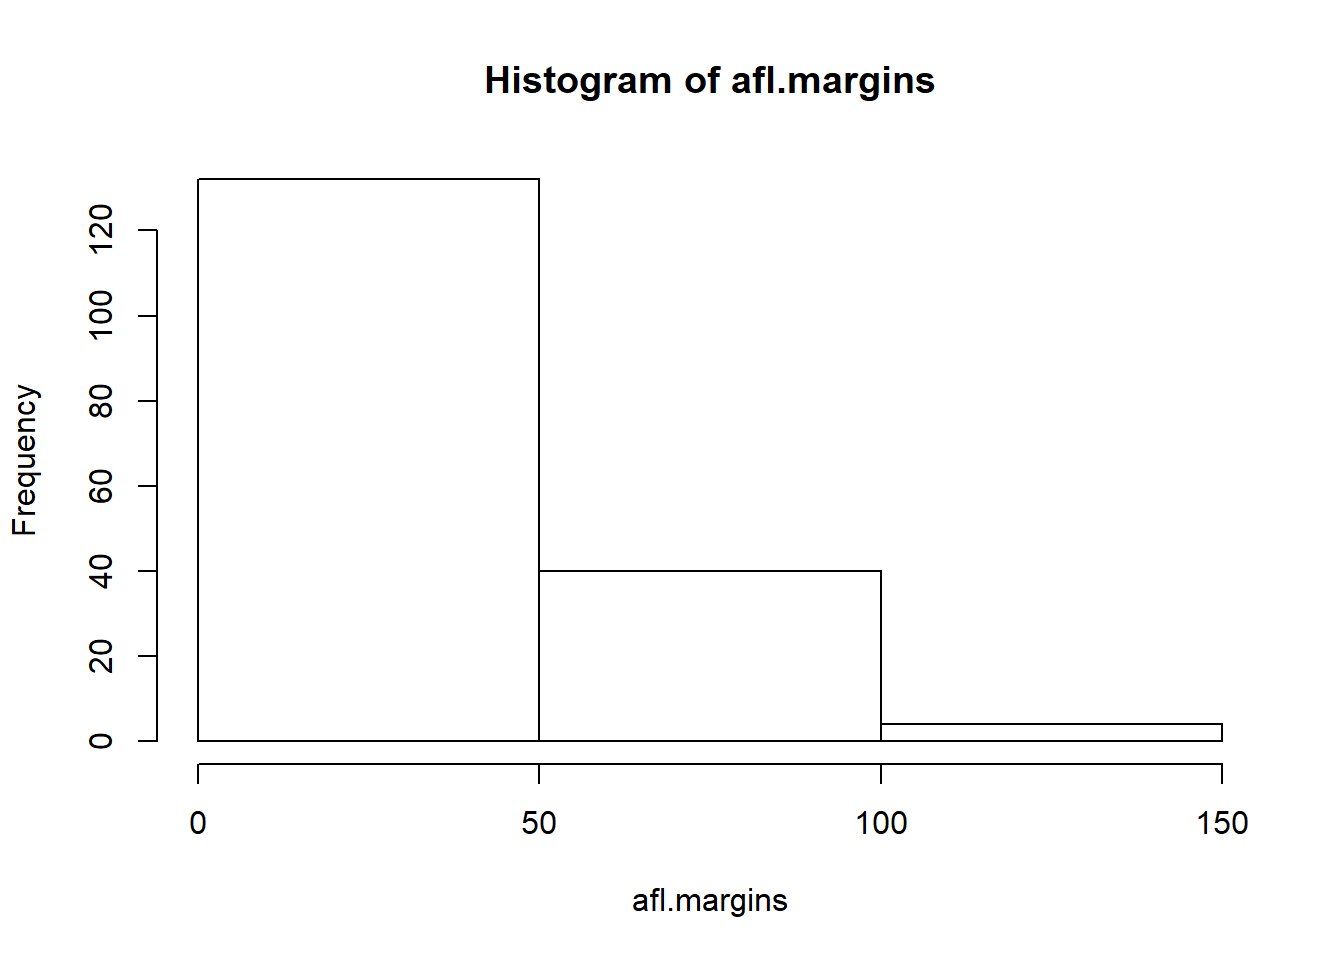 A histogram with too few bins